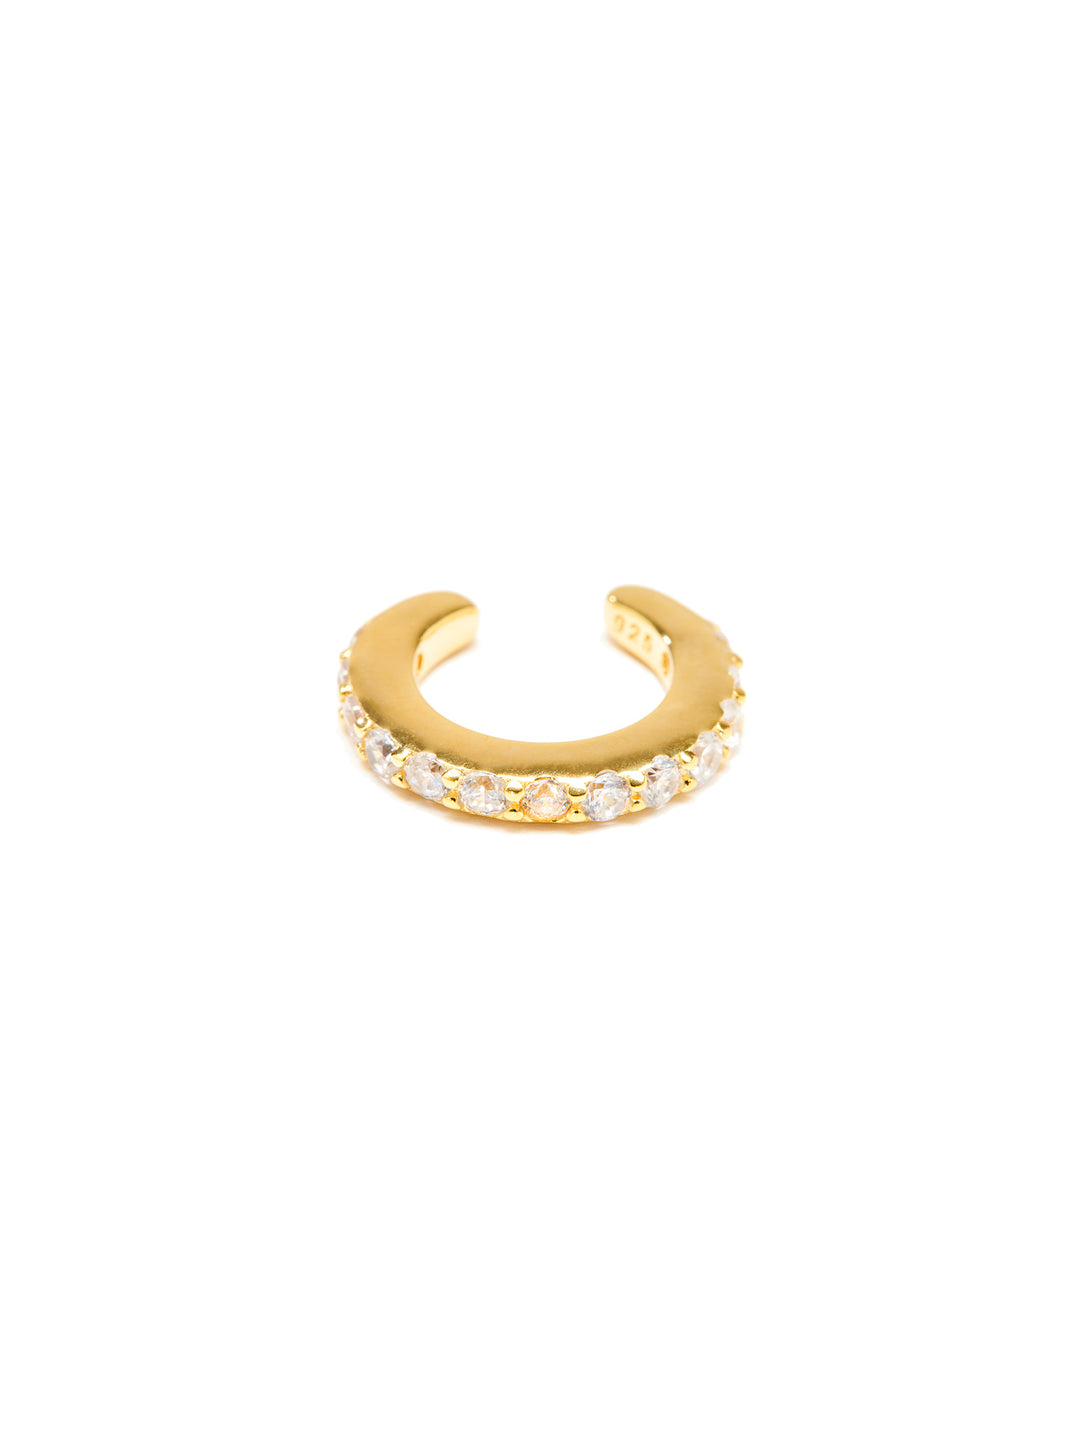 ICONIC - Ear Cuff, Color: 18K Yellow Gold